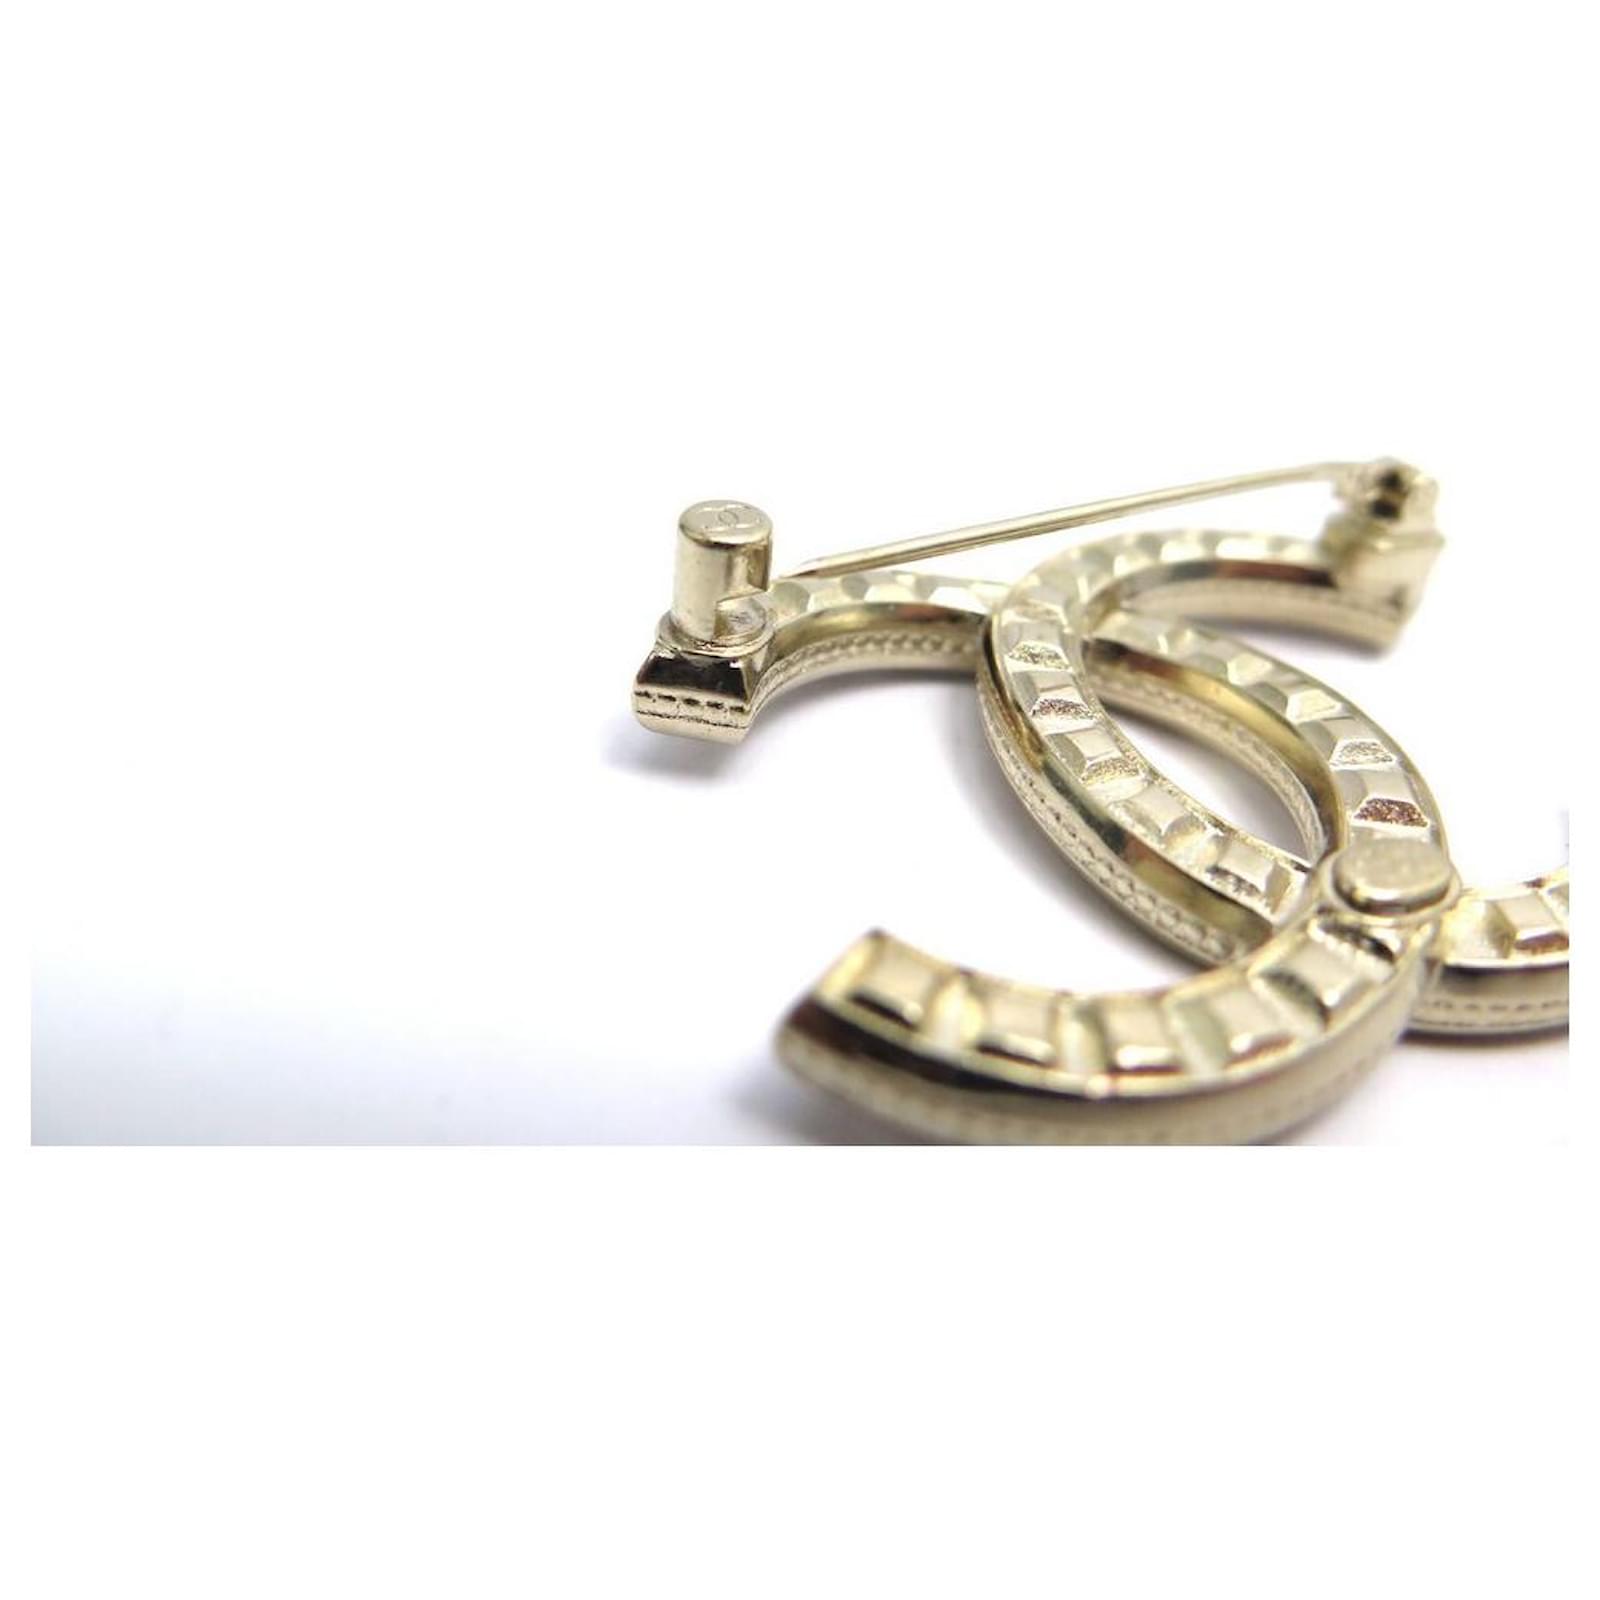 Chanel Vintage Gold CC Brooch  Rent Chanel jewelry for $55/month